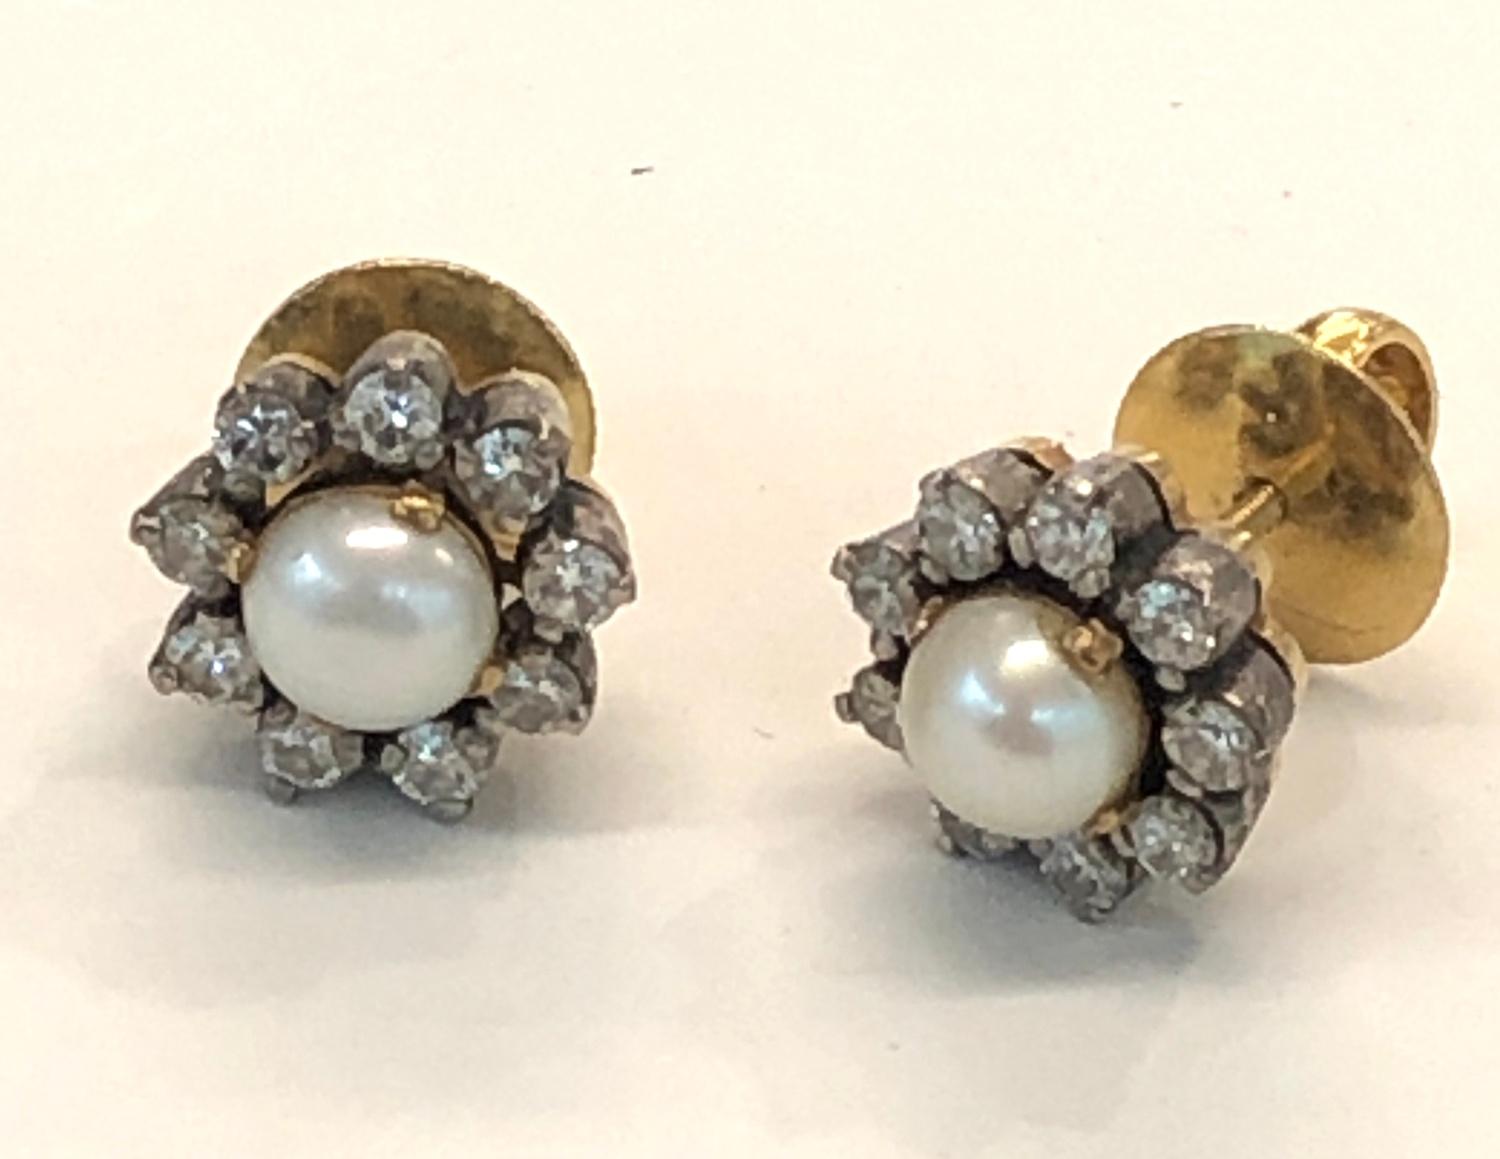 Pair of diamond and pearl earrings 18ct gold set with central pearl with diamonds around pearl - Image 2 of 5